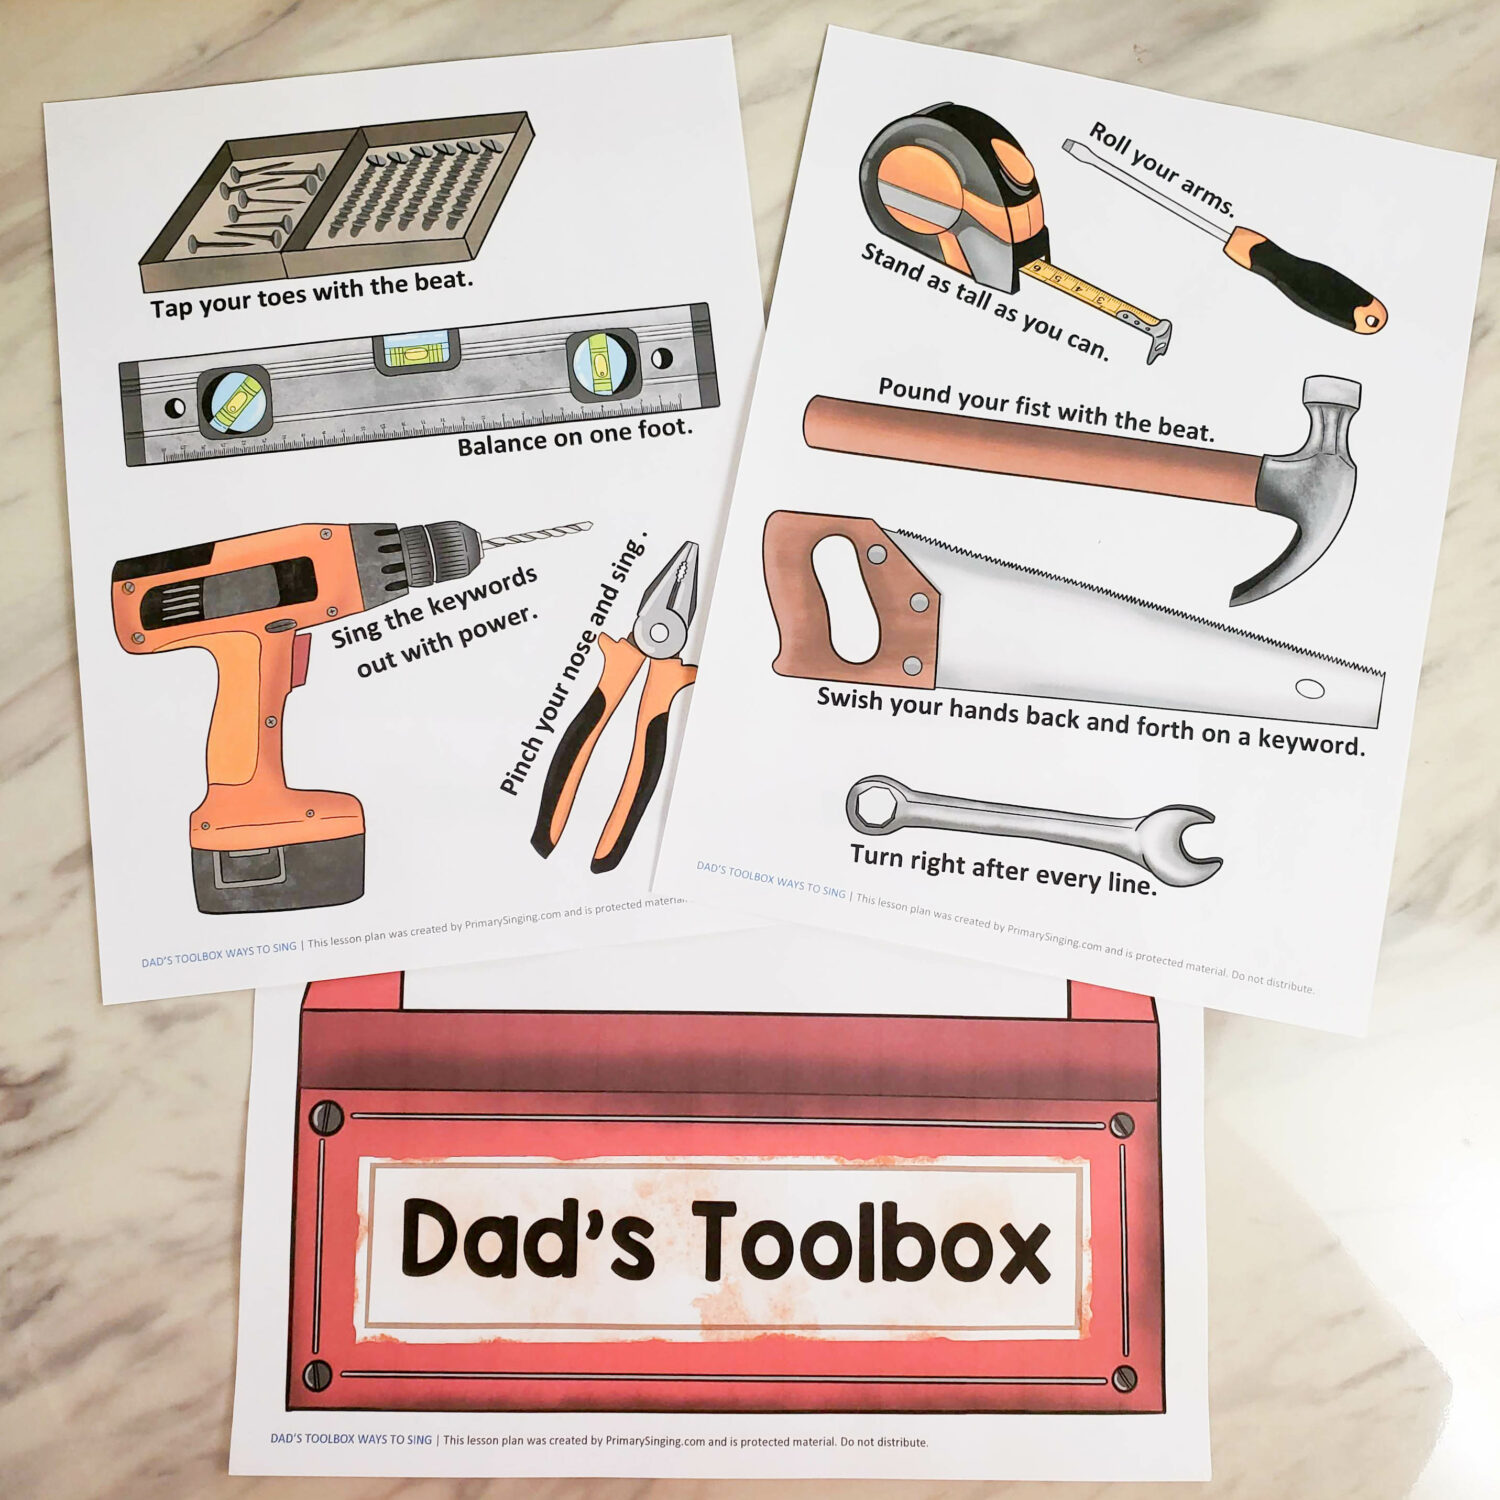 Father's Day Dad's Toolbox fun singing time game to review ANY Father's Day primary song pick! You'll pick out a tool to add to the toolbox and use a fun way to sing included! A no-fuss easy prep lesson plan for LDS Primary Music Leaders.